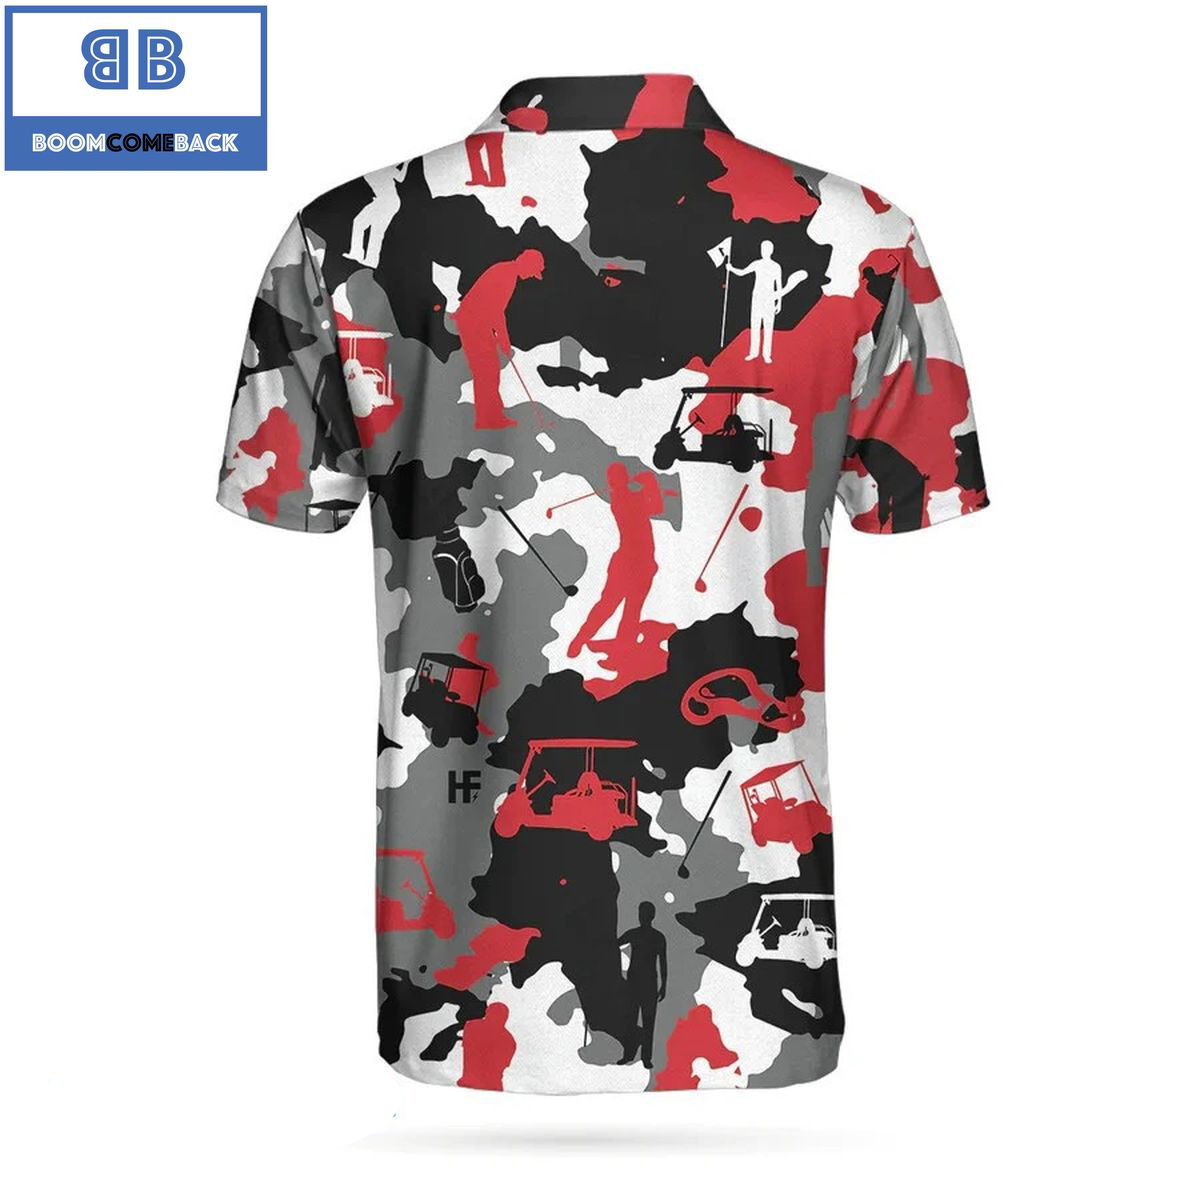 Red2BAnd2BWhite2BCamouflage2BGolf2BWith2BGolfer2BSilhouette2BAthletic2BCollared2BMens2BPolo2BShirt2B4 p2KCq